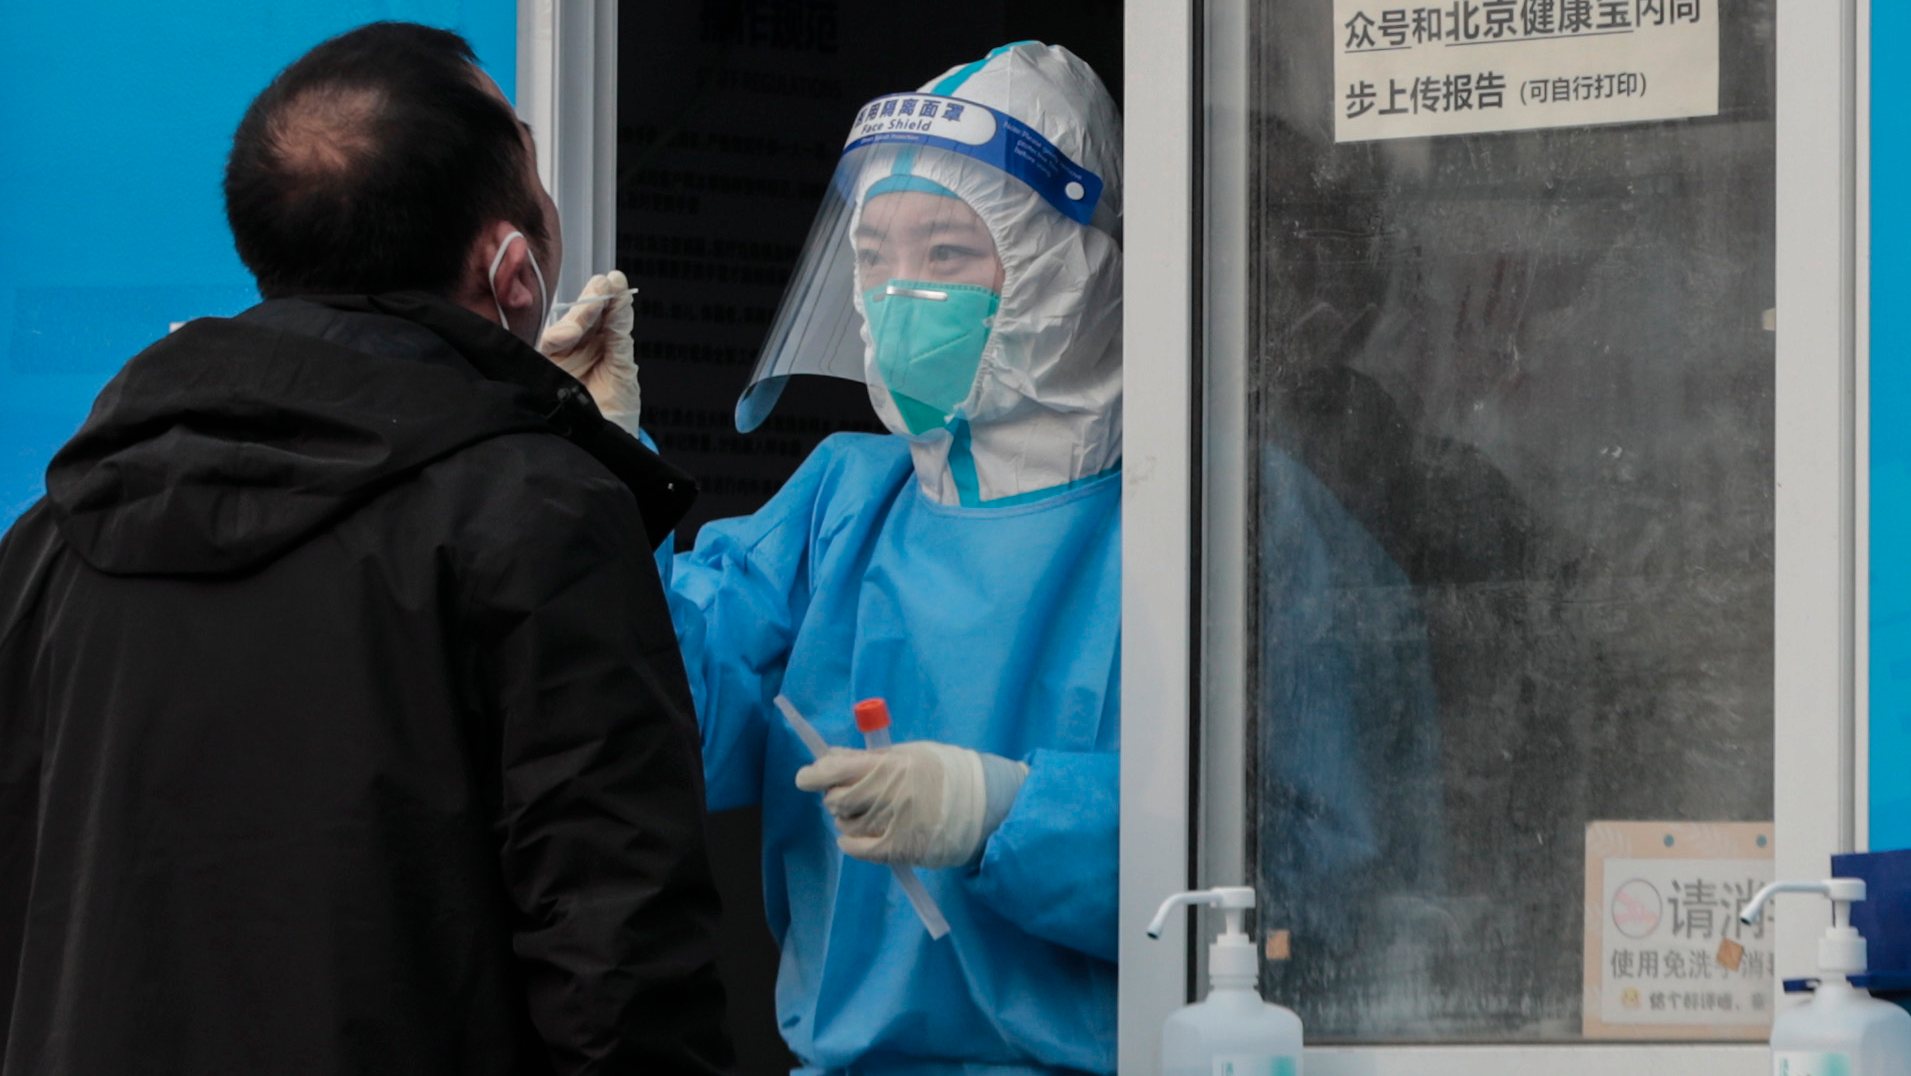 epa09717492 A man undergoes COVID-19 nucleic acid testing in Beijing, China, 30 January 2022. The Chinese mainland on 29 January recorded 54 locally transmitted COVID-19 cases including 20 cases were reported in China&#039;s capital Beijing.  EPA/WU HONG